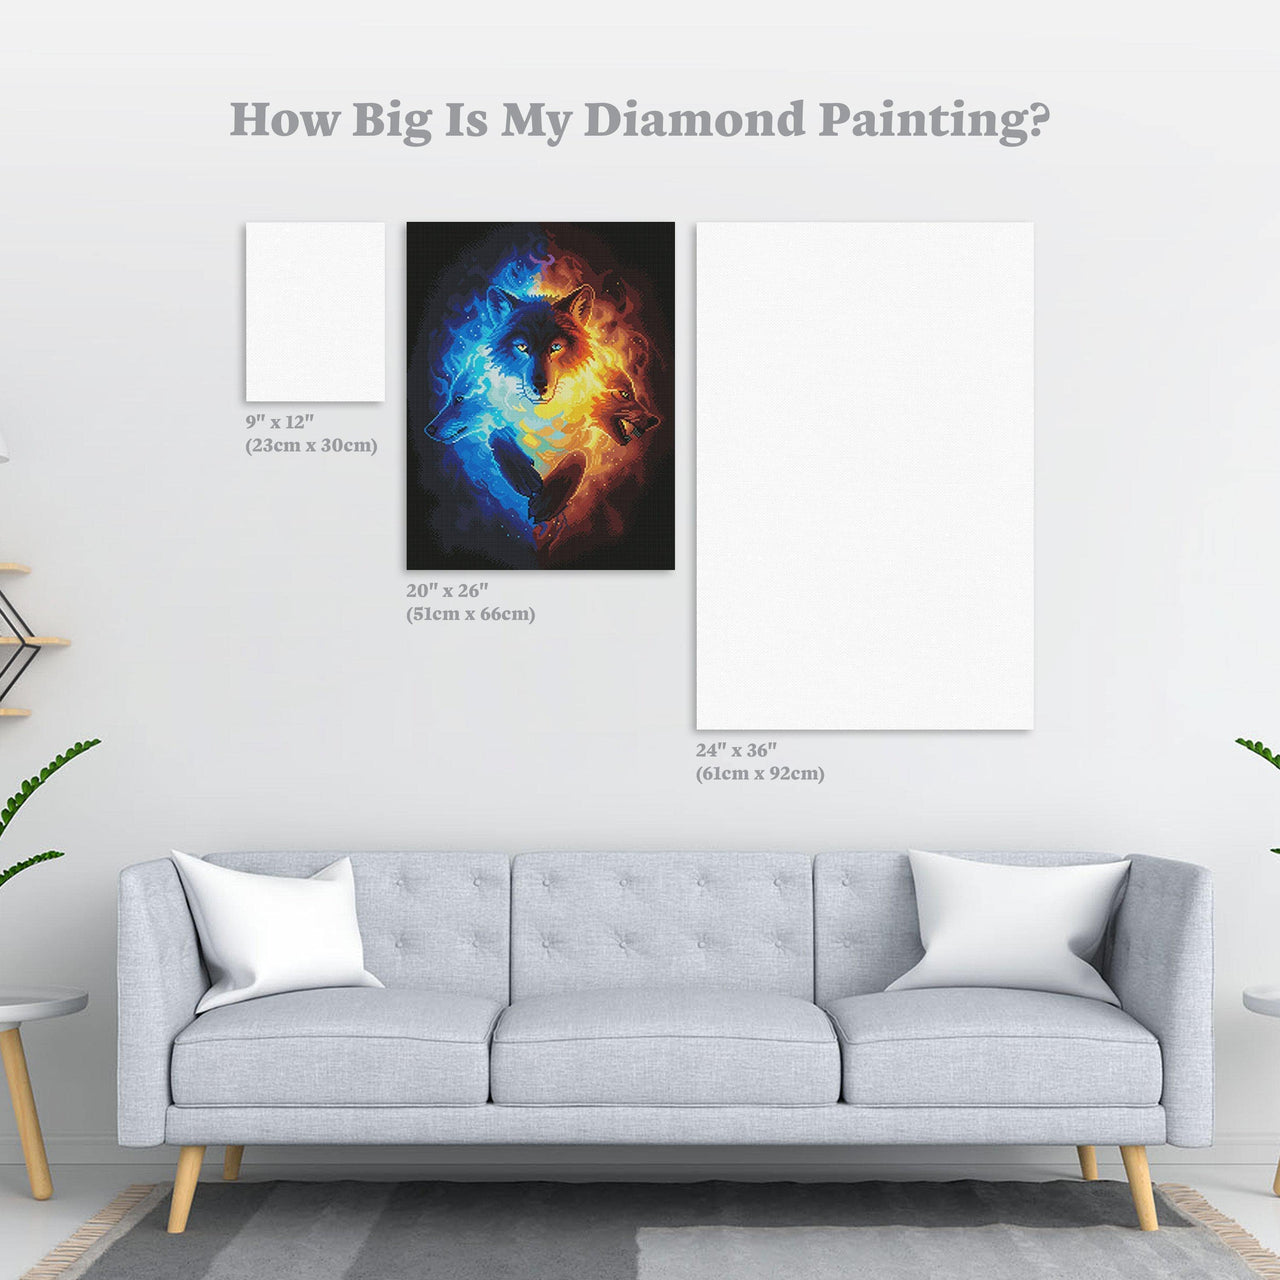 Diamond Painting Inner Fight 20" x 26″ (51cm x 66cm) / Round with 37 Colors including 4 ABs / 42,536